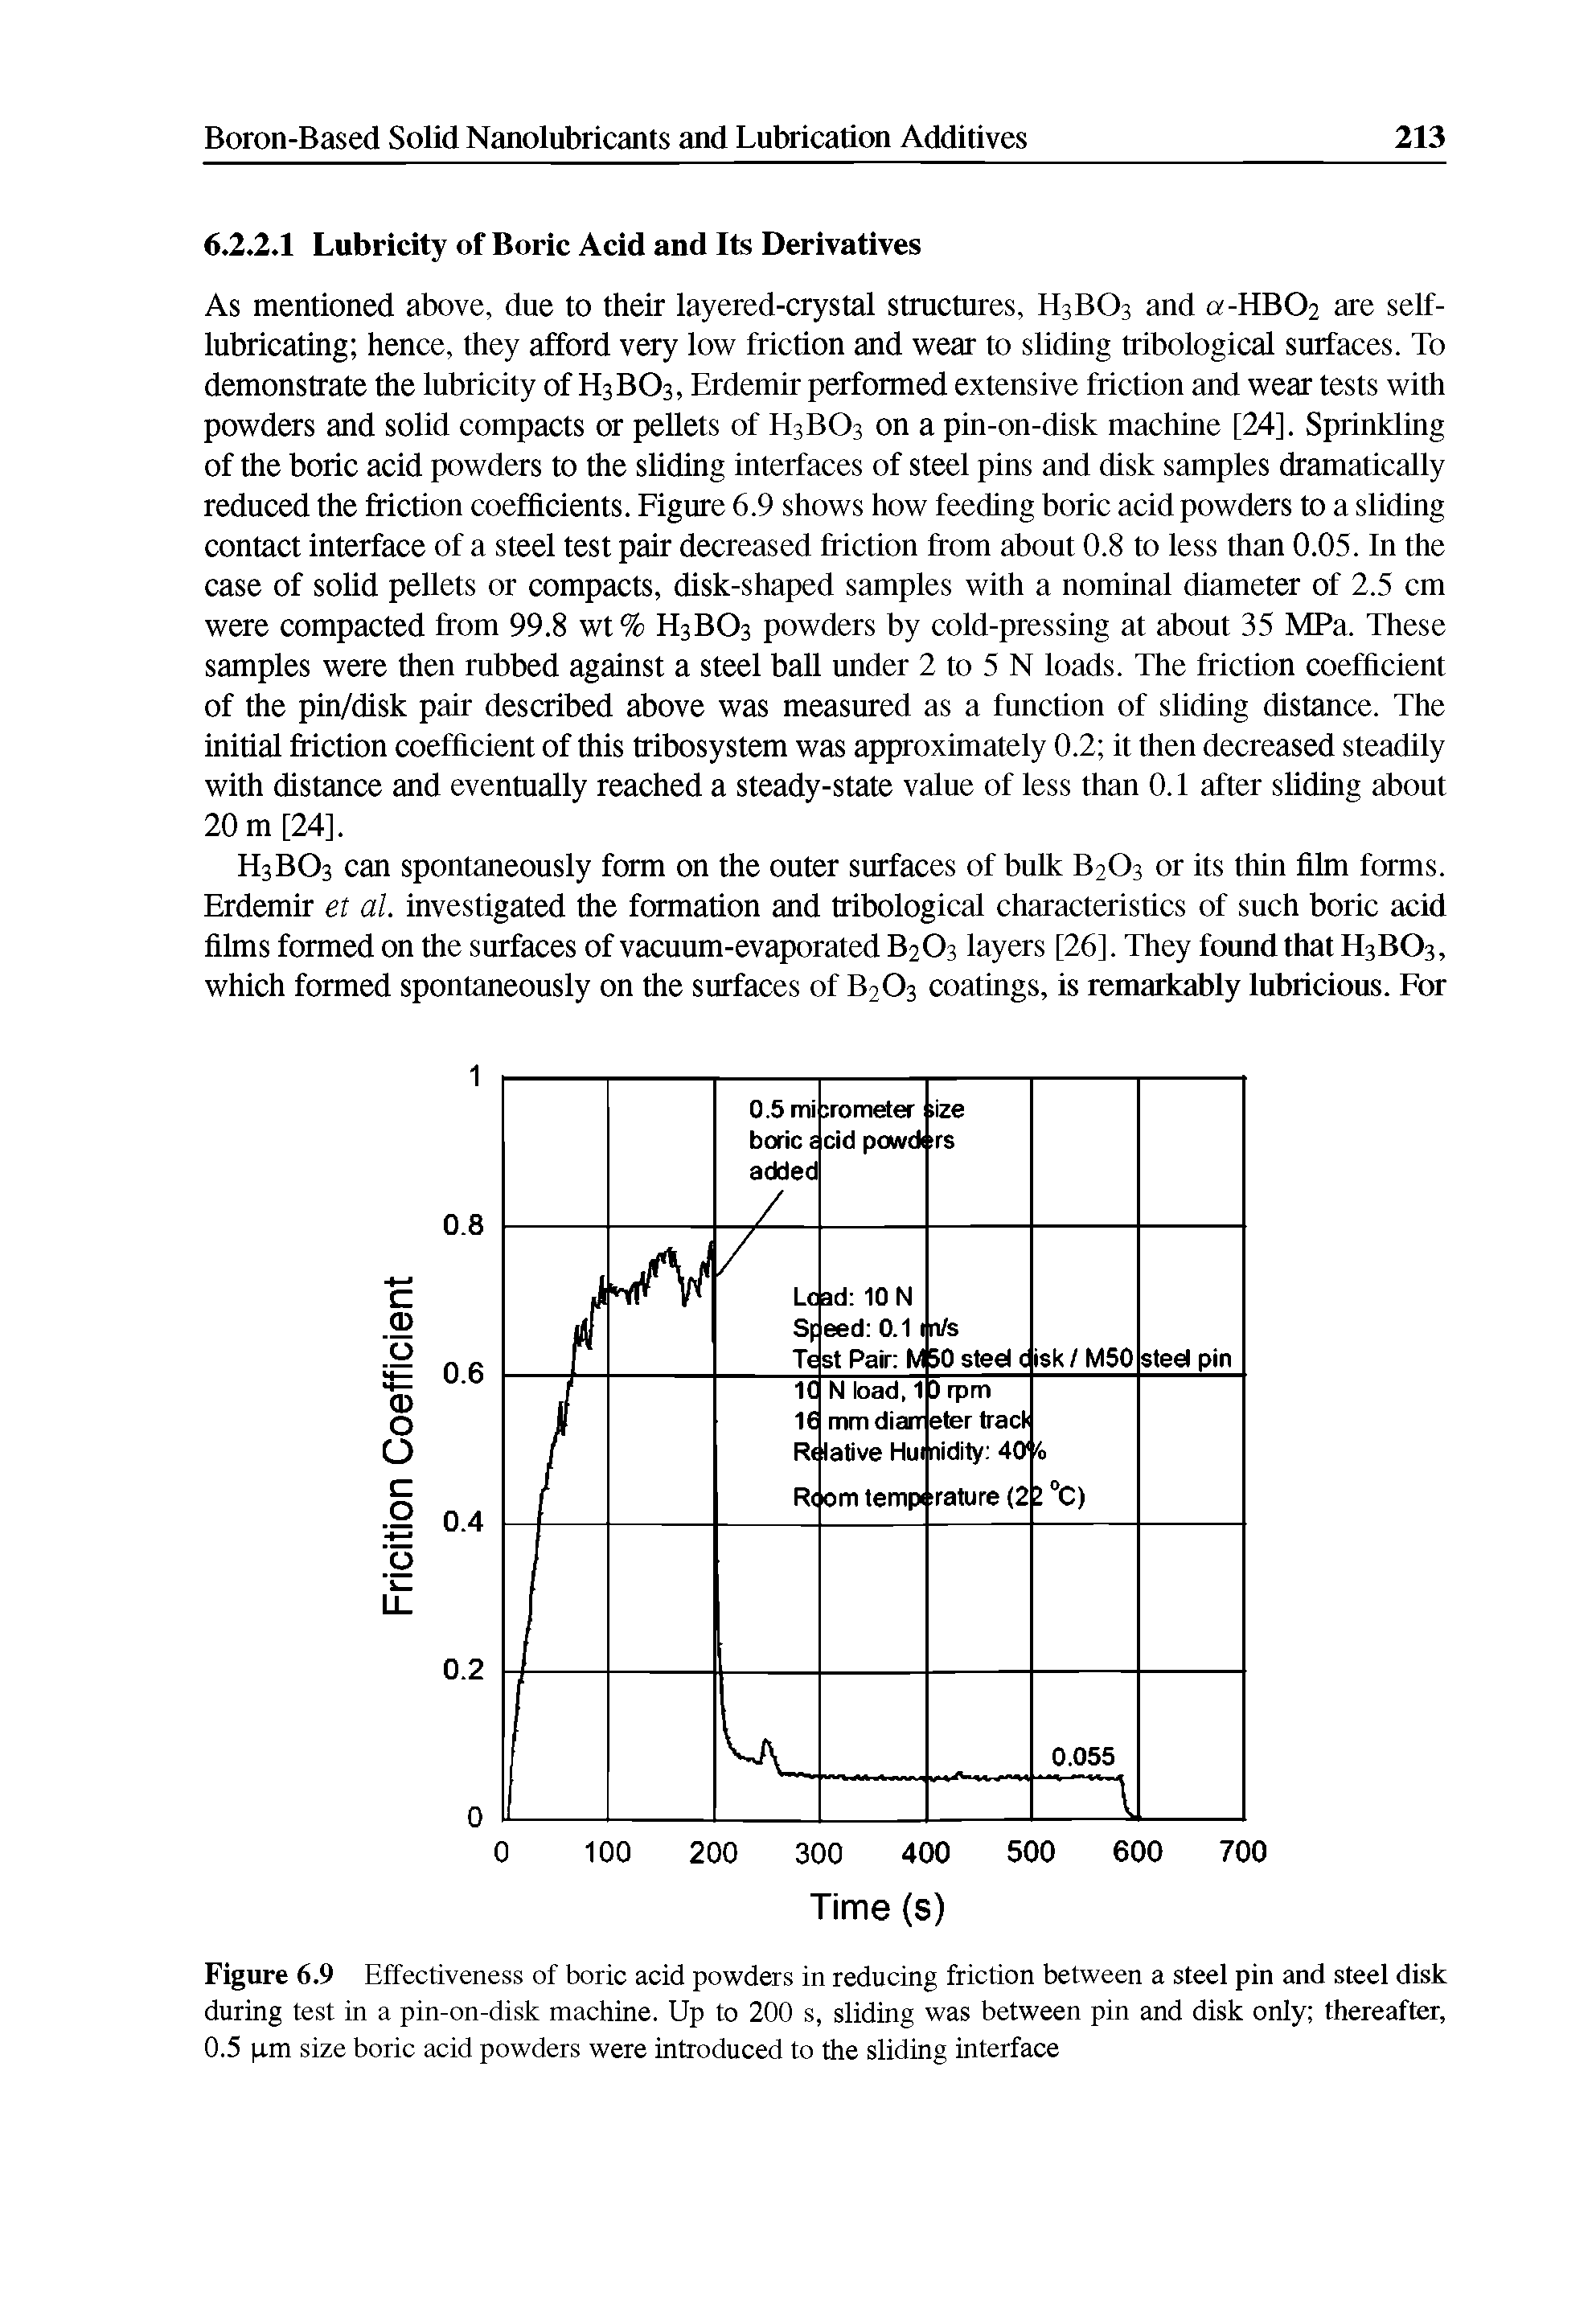 Figure 6.9 Effectiveness of boric acid powders in reducing friction between a steel pin and steel disk during test in a pin-on-disk machine. Up to 200 s, sliding was between pin and disk only thereafter, 0.5 pm size boric acid powders were introduced to the sliding interface...